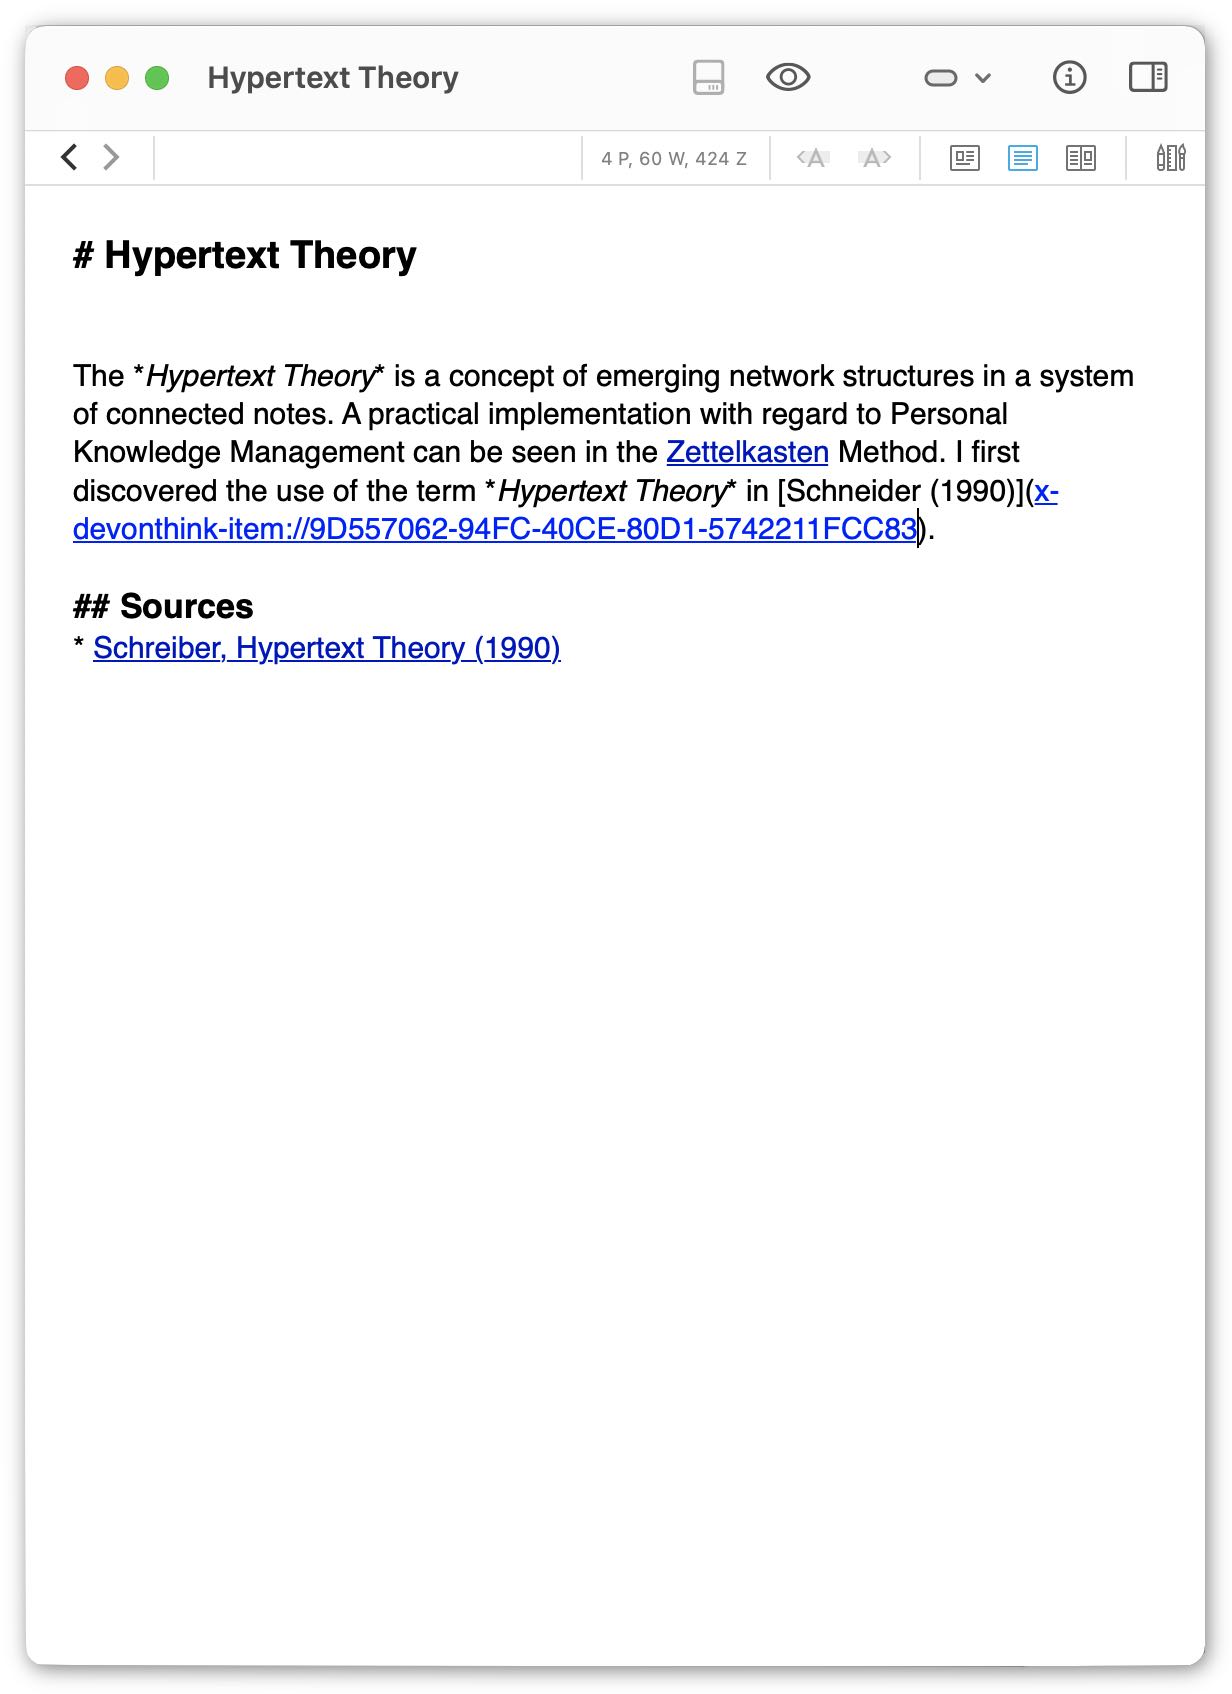 Permanent note on the Hypertext theory (in edit mode).